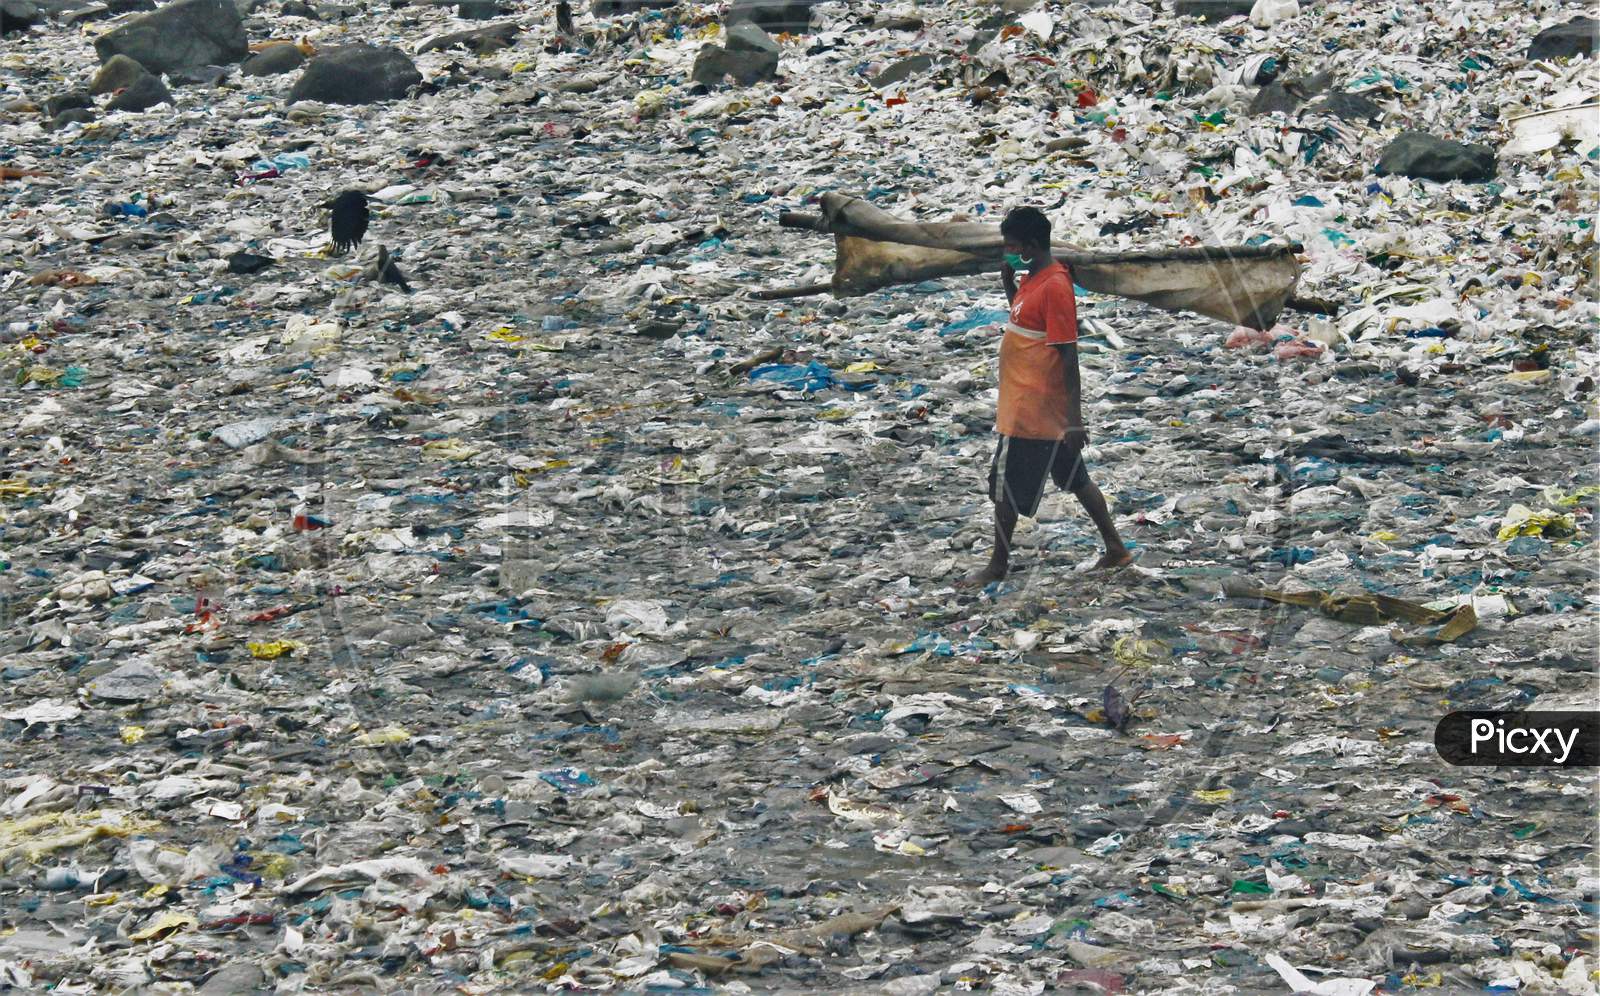 A fisherman walks on a beach covered with plastic waste to go to the sea to wash a cloth used to cover boats on the occasion of World Environment Day, in Mumbai, India on June 5, 2020.